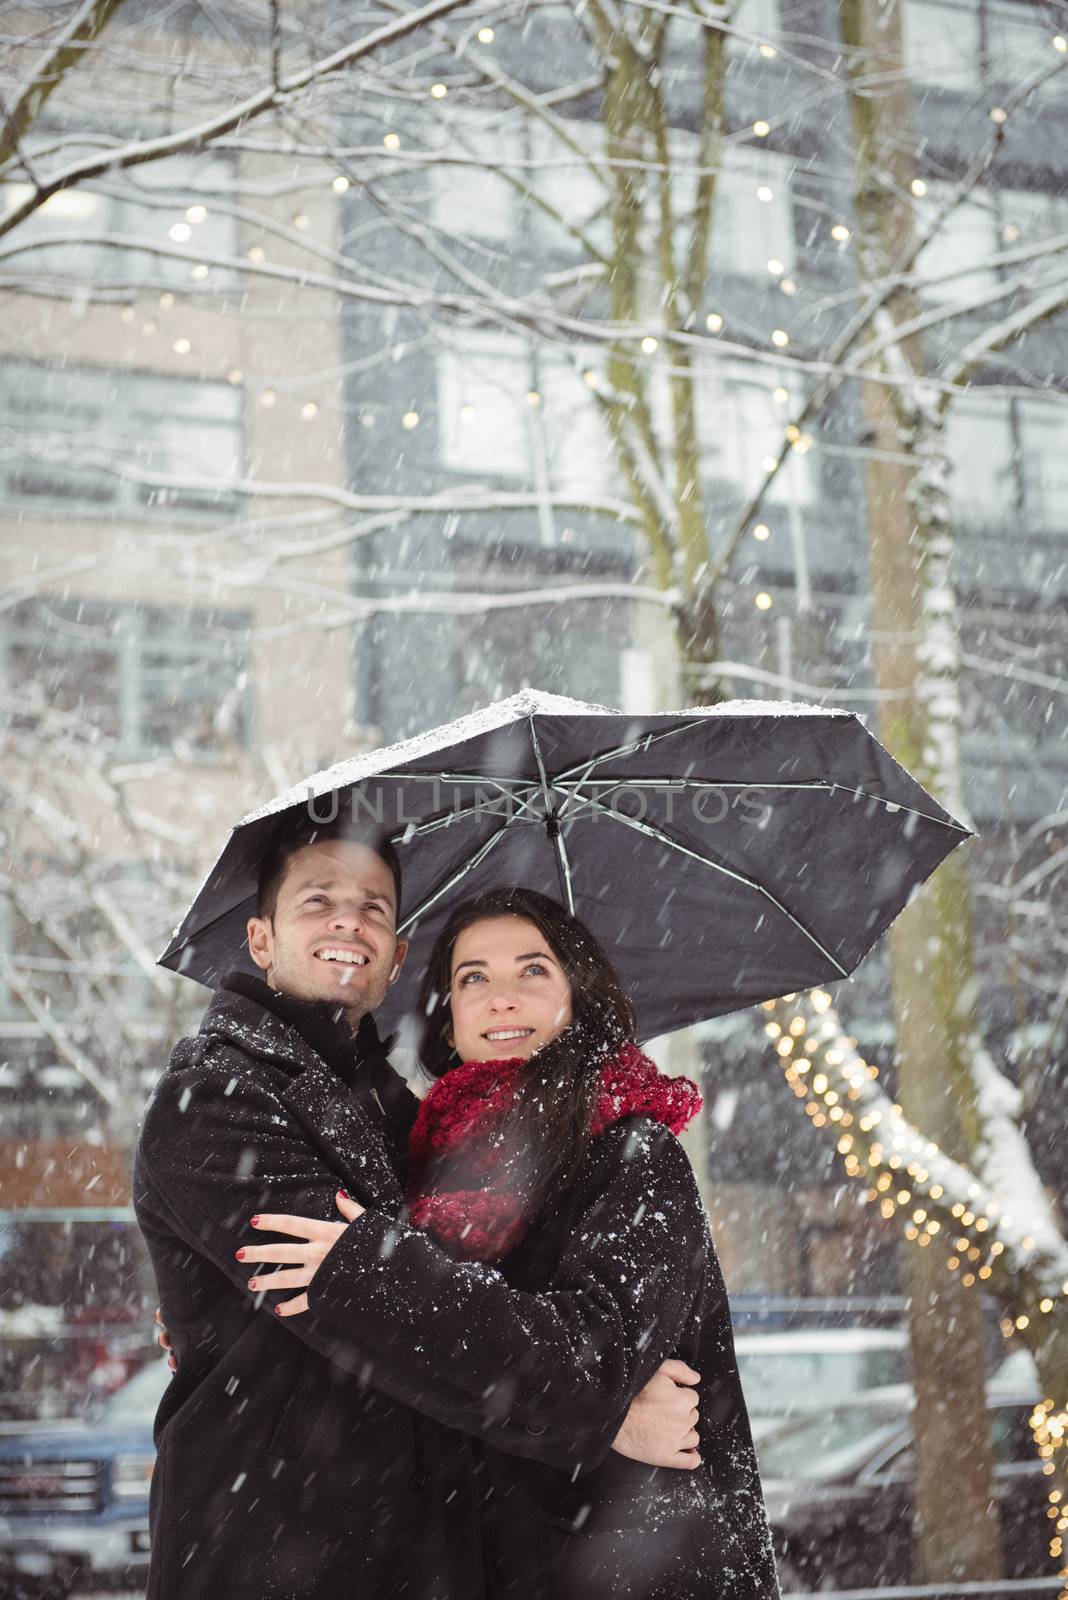 Romantic couple embracing in street during snowfall